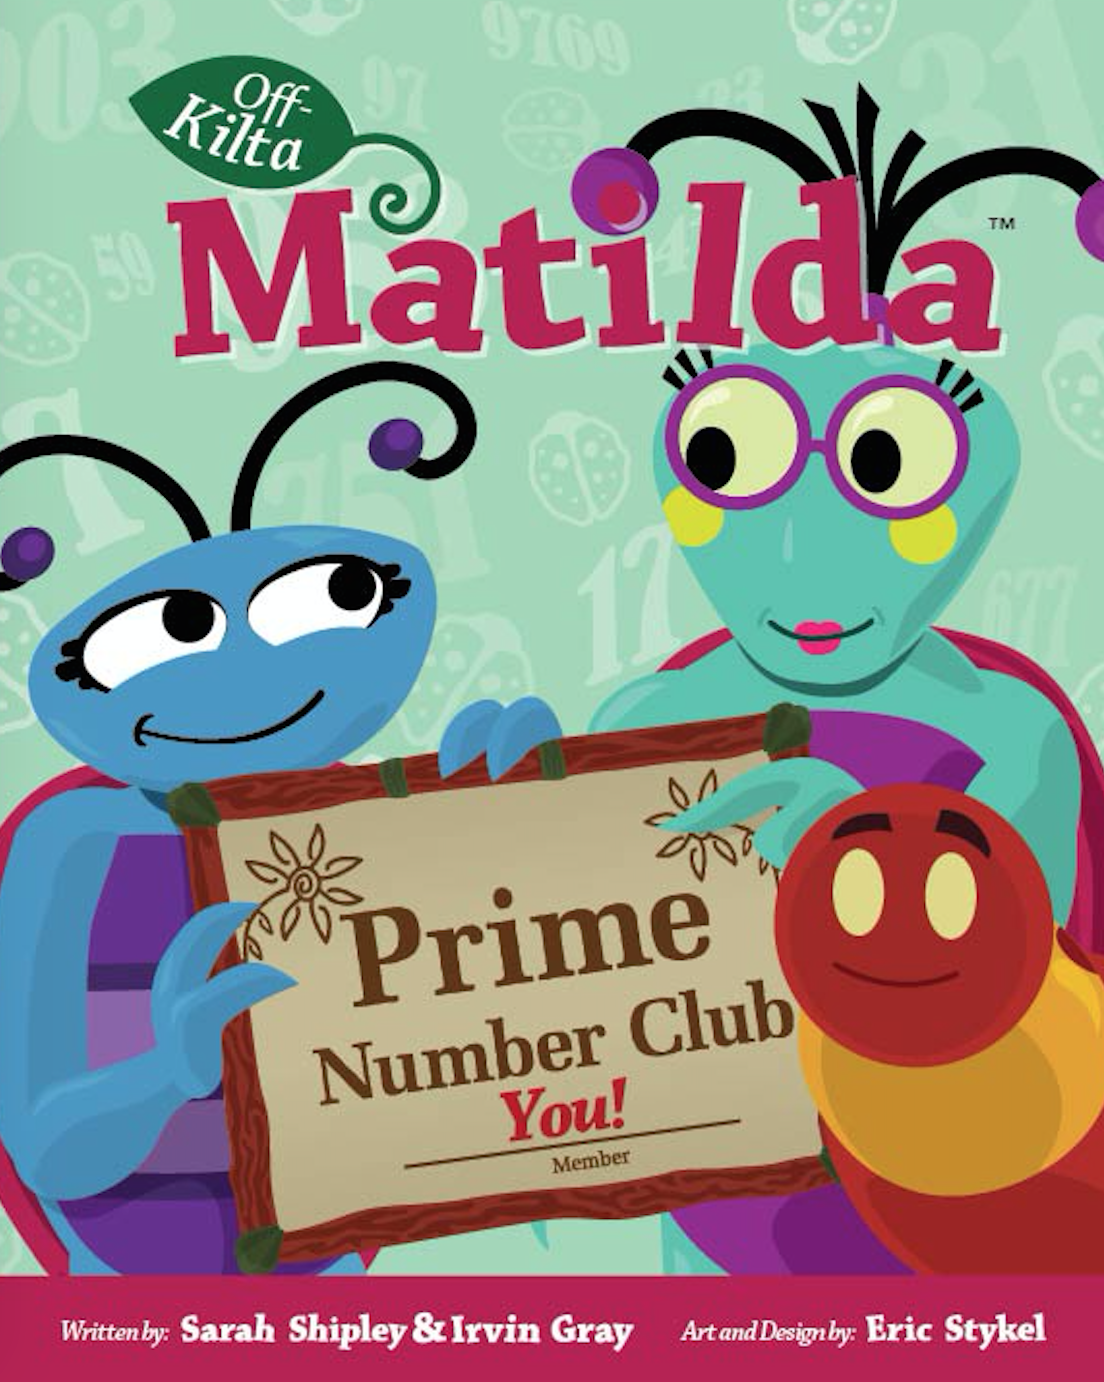 The Prime Number Club